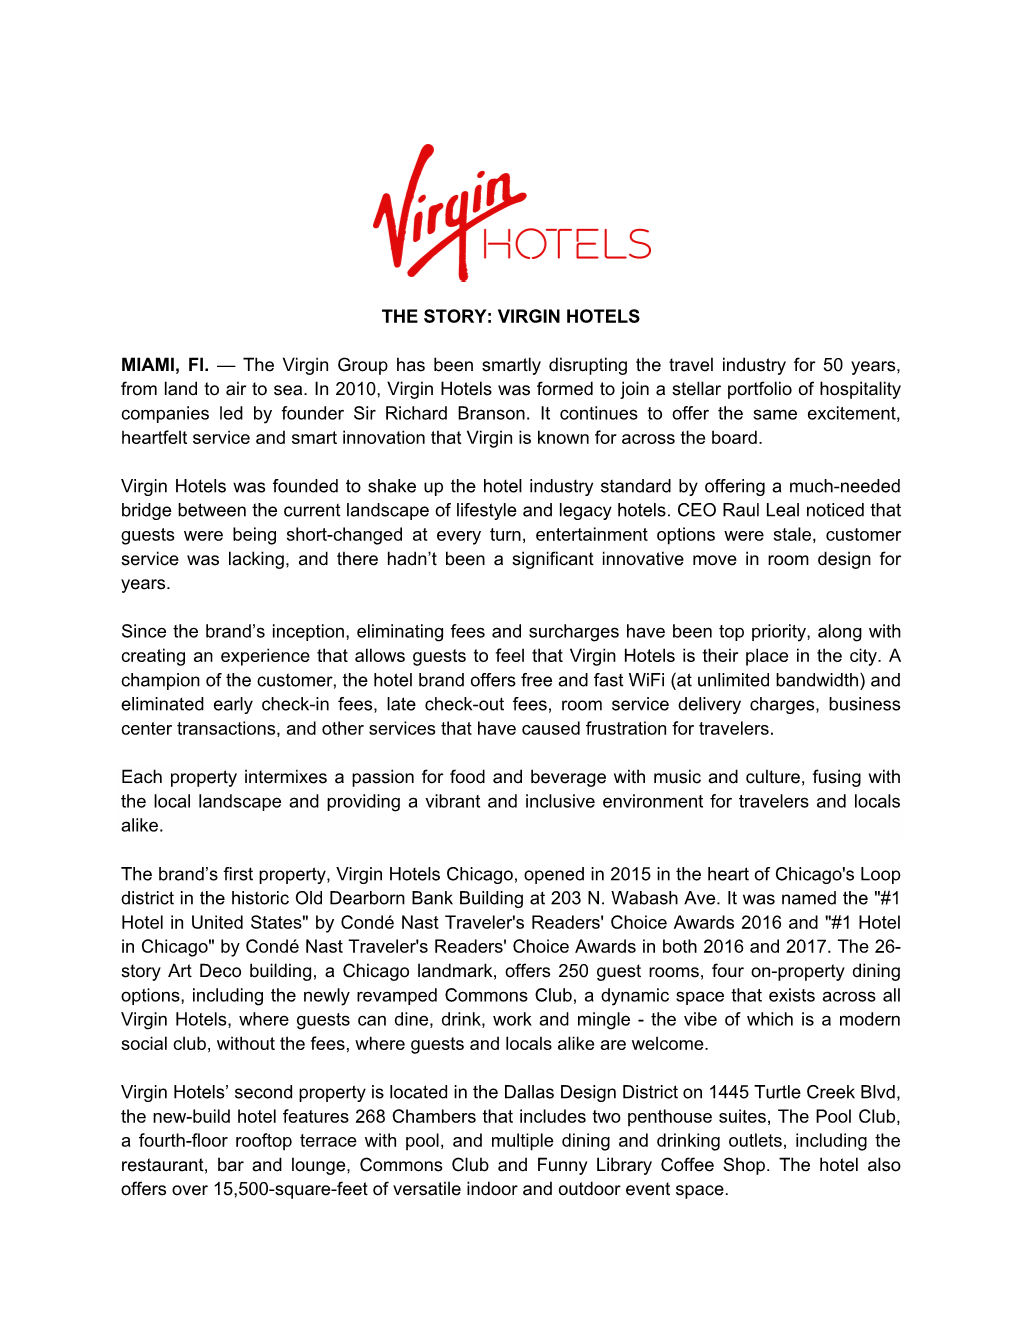 THE STORY: VIRGIN HOTELS MIAMI, Fl. — the Virgin Group Has Been Smartly Disrupting the Travel Industry for 50 Years, From